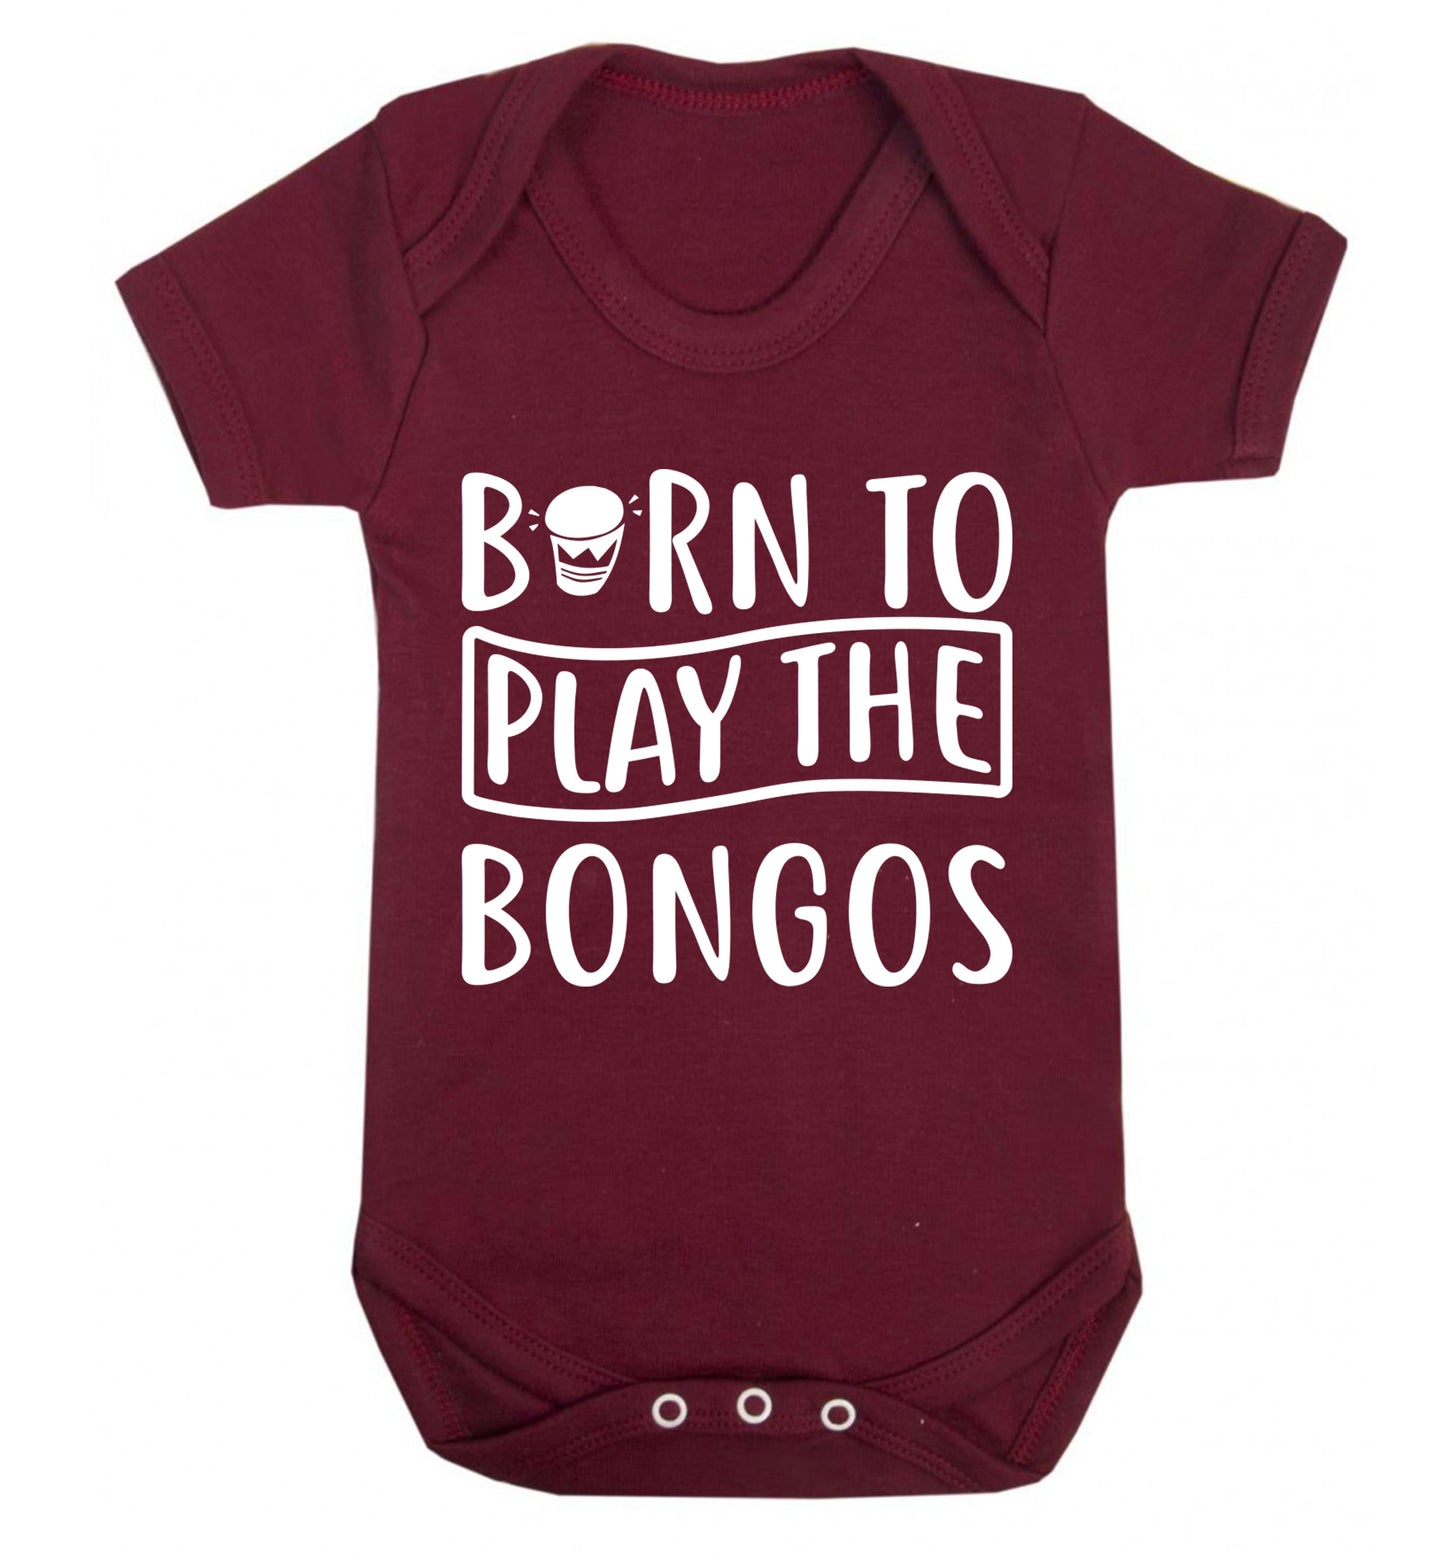 Born to play the bongos Baby Vest maroon 18-24 months